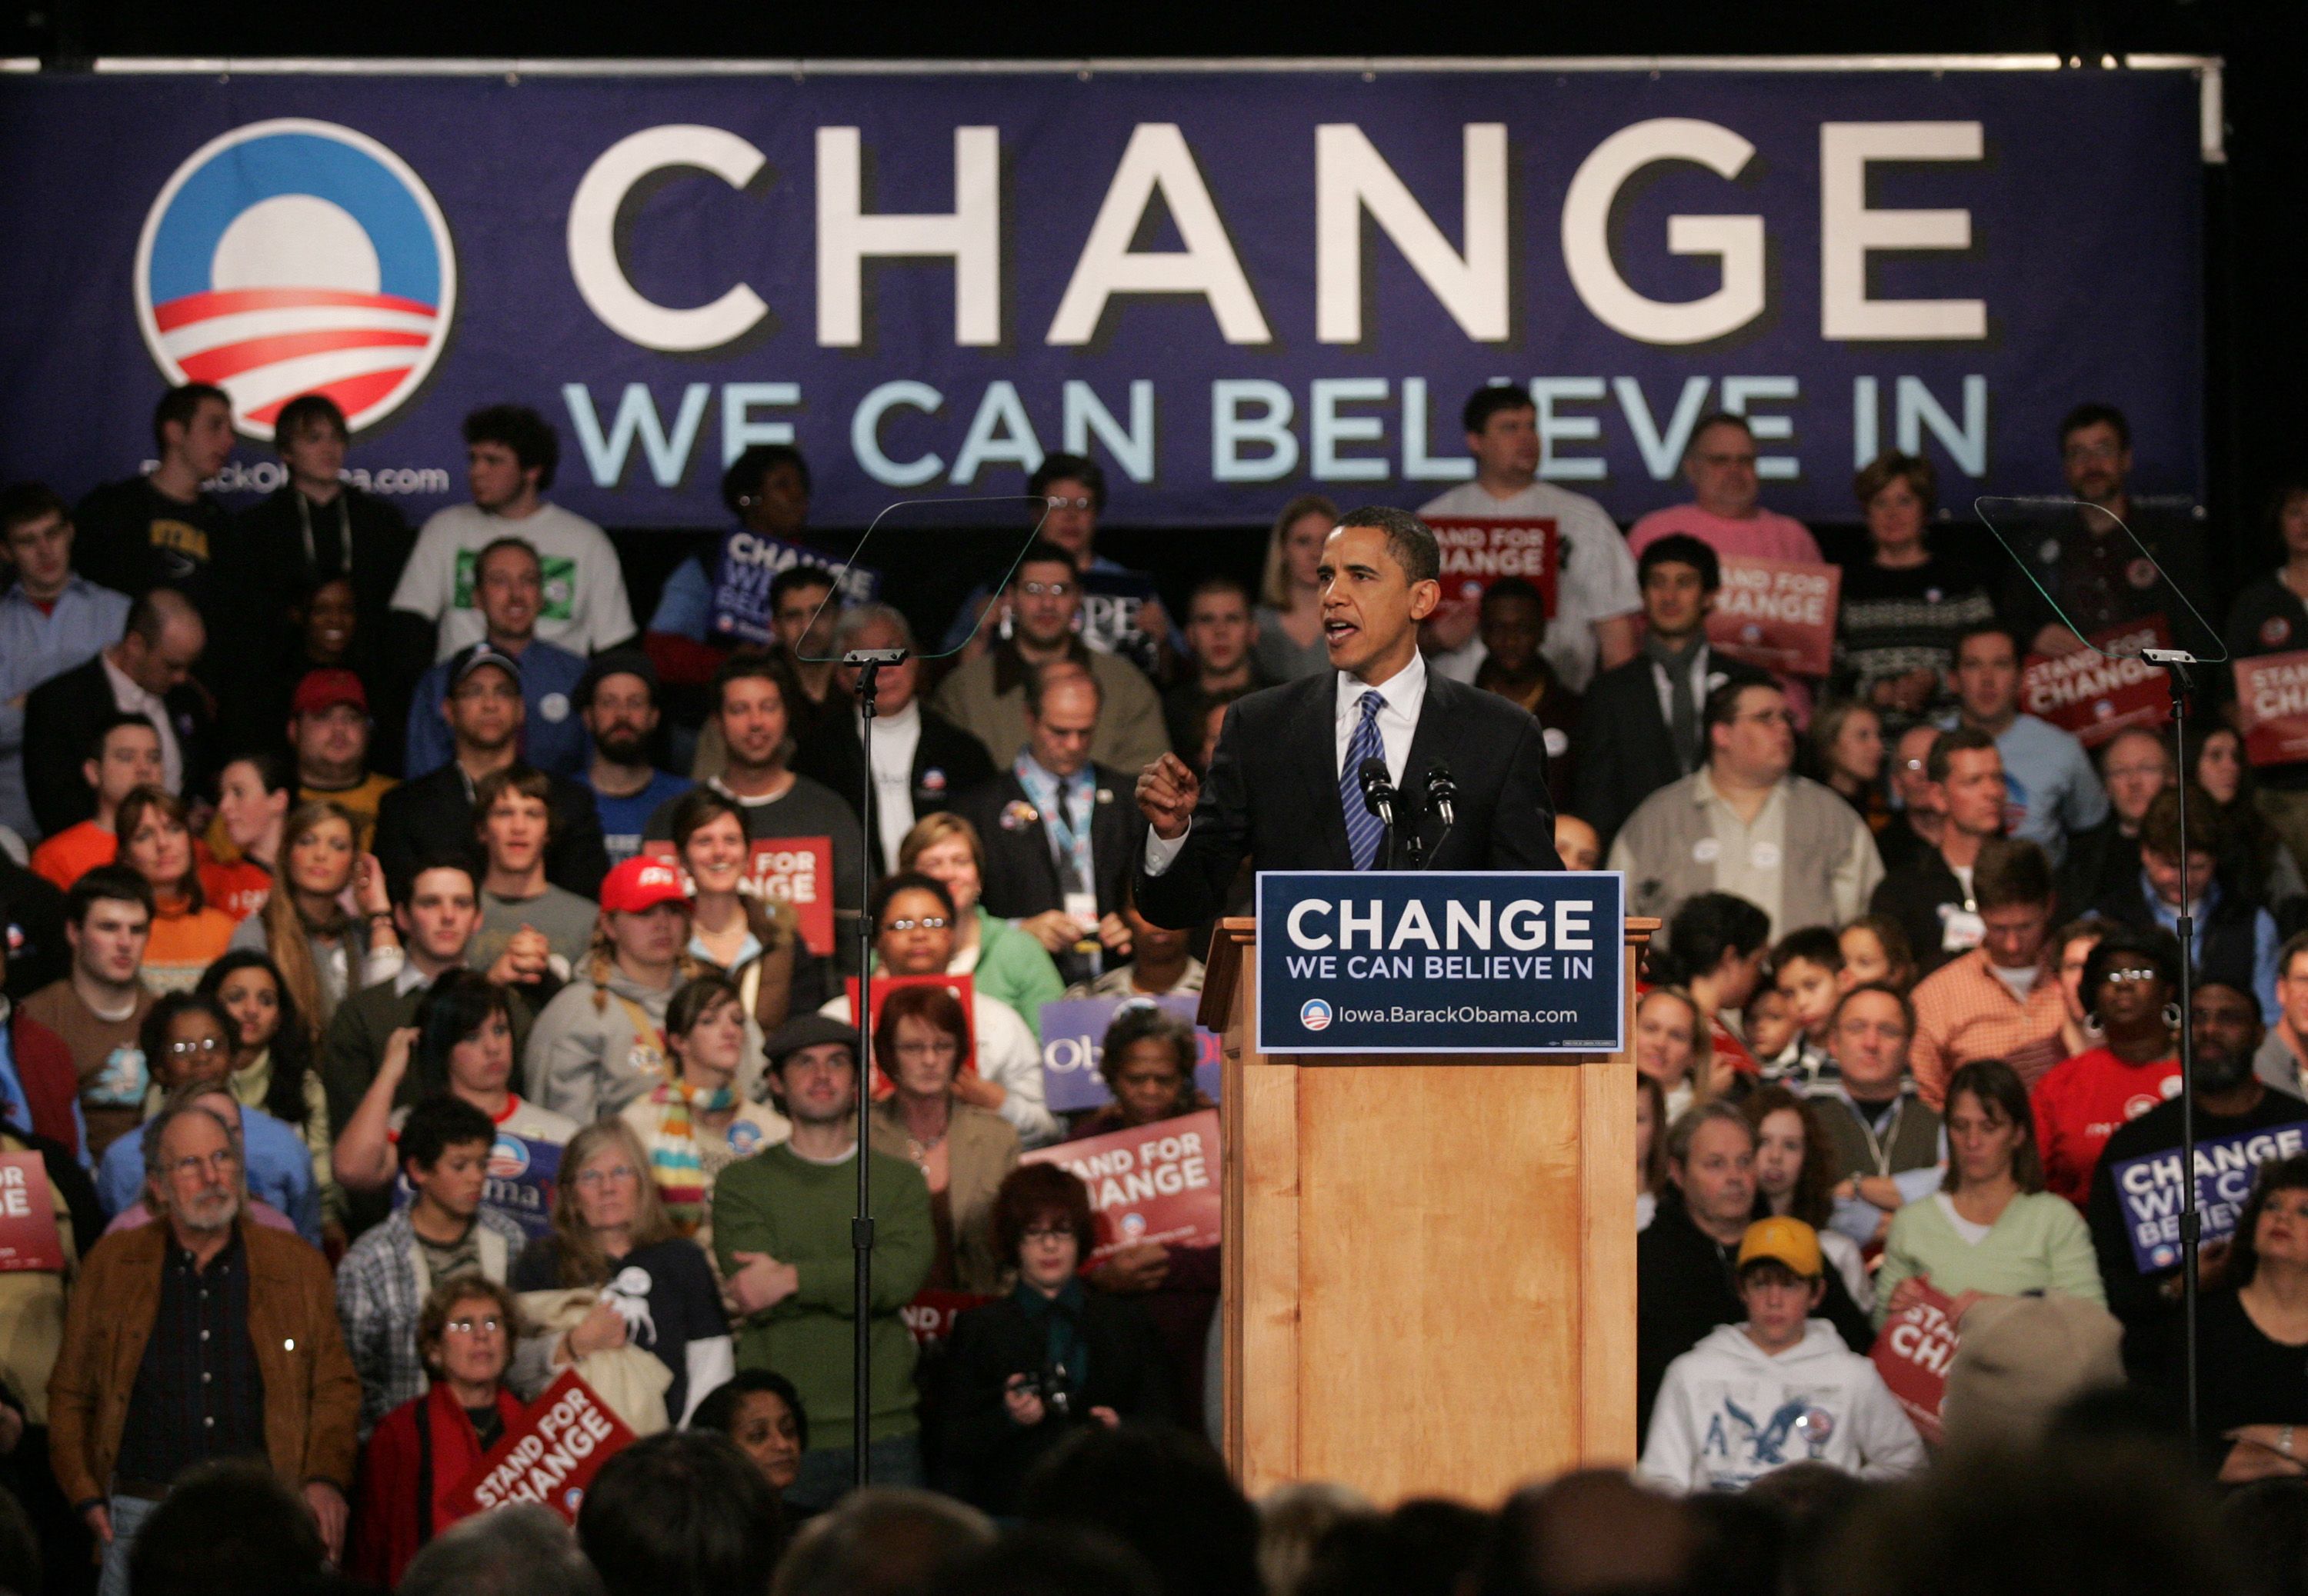 Obama stands at a lectern with a crowd behind him as he gives a speech. A sign says "CHANGE we can believe in" 